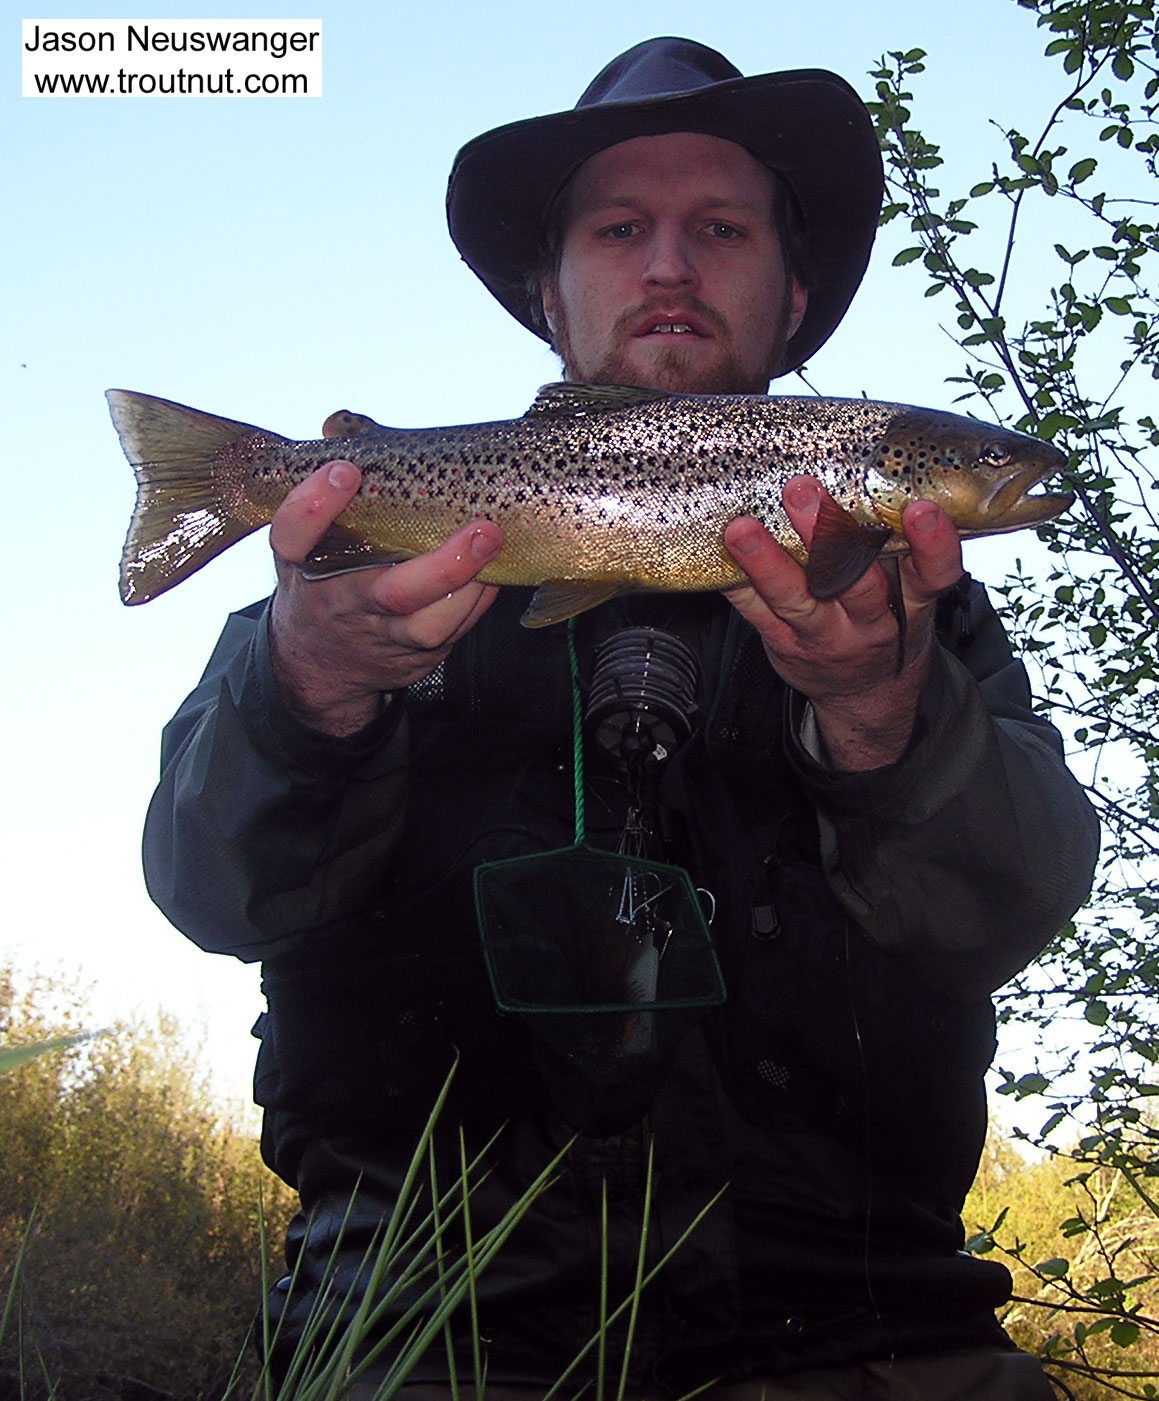 Here I am soaking wet holding up a hard-earned 17 inch brown trout. An hour or so before I caught her, I attempted a treacherous crossing over loose gravel, and the river was running high.  I found myself treadmilling on my tiptoes to maintain my footing as the gravel slipped beneath me, and I was swept off downstream and swam to shore with a few gallons of 55 degree water in my waders. Being me, I kept fishing. From the Bois Brule River in Wisconsin.